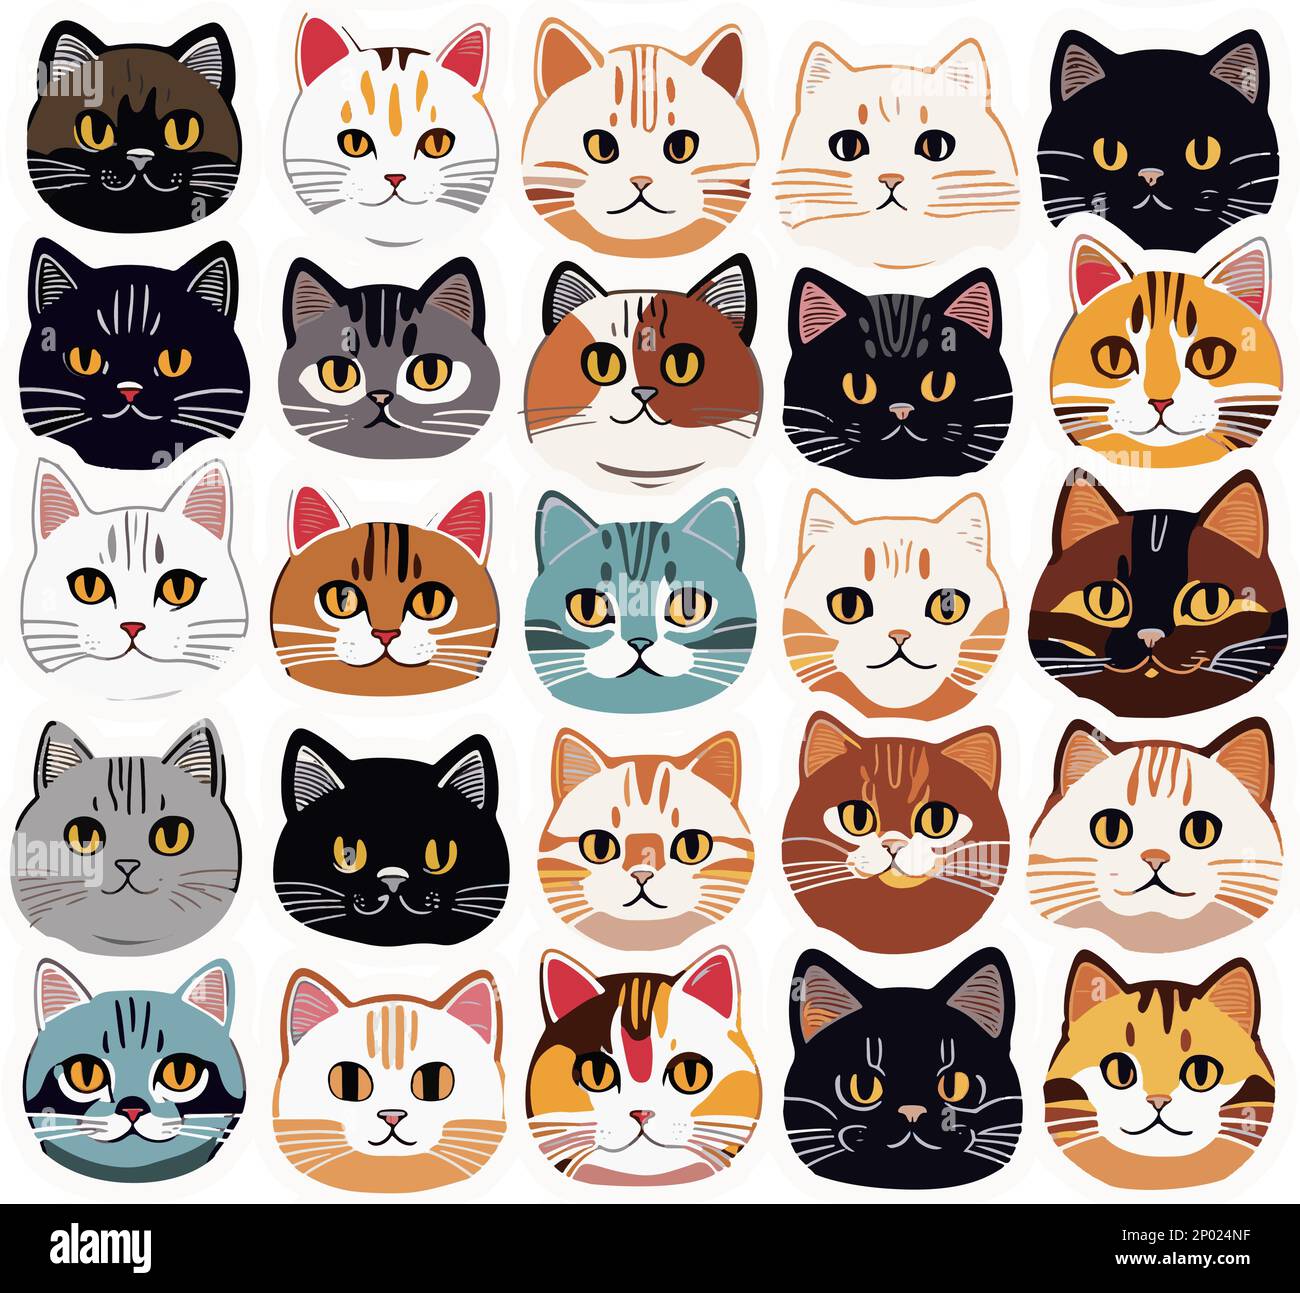 Vector Retro Hand Drawn Japanese Style Wild Cat or Kitten Face Seamless Surface Pattern for Products or Wrapping Paper Prints. Stock Vector